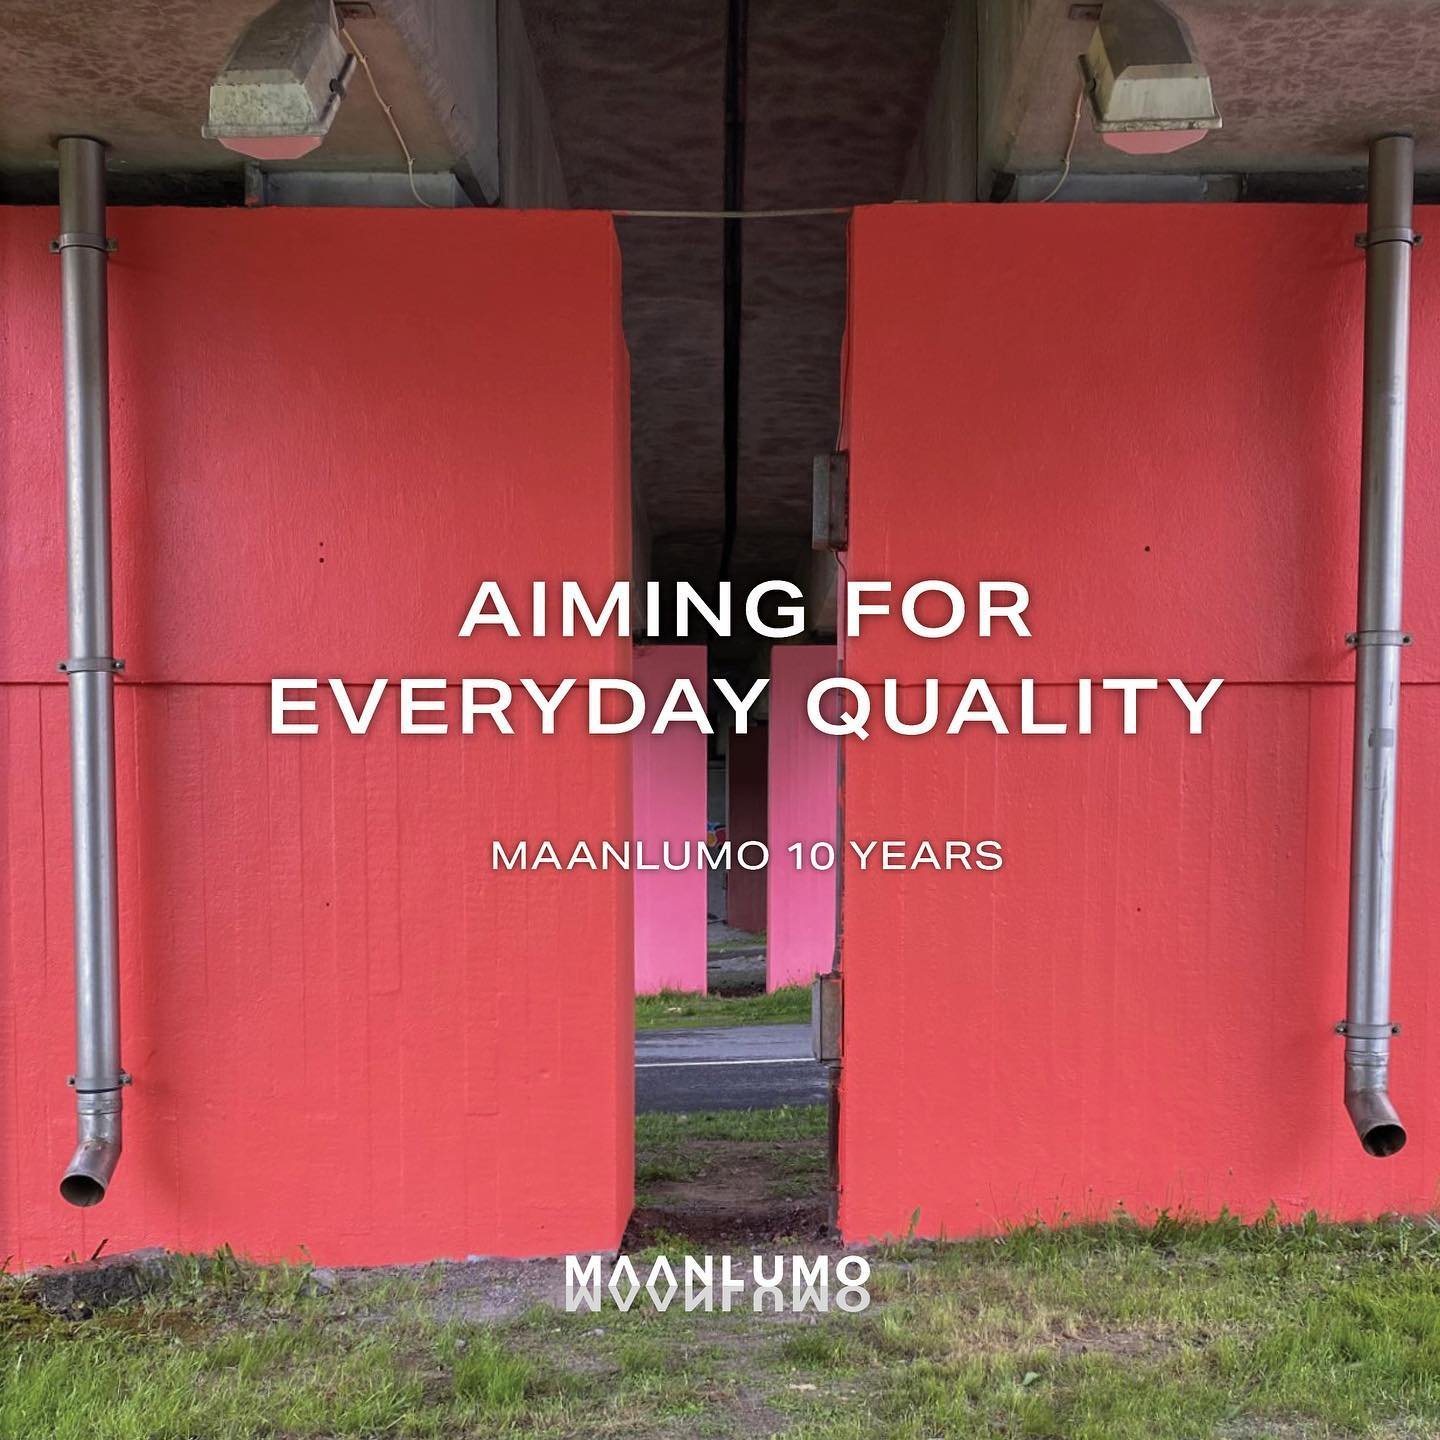 We believe that everyone has a right to a high-quality everyday environment. In our work we strive to create spaces that are good for people across all age groups. Sometimes, the means to improve our living environment can be small. At best, everyday